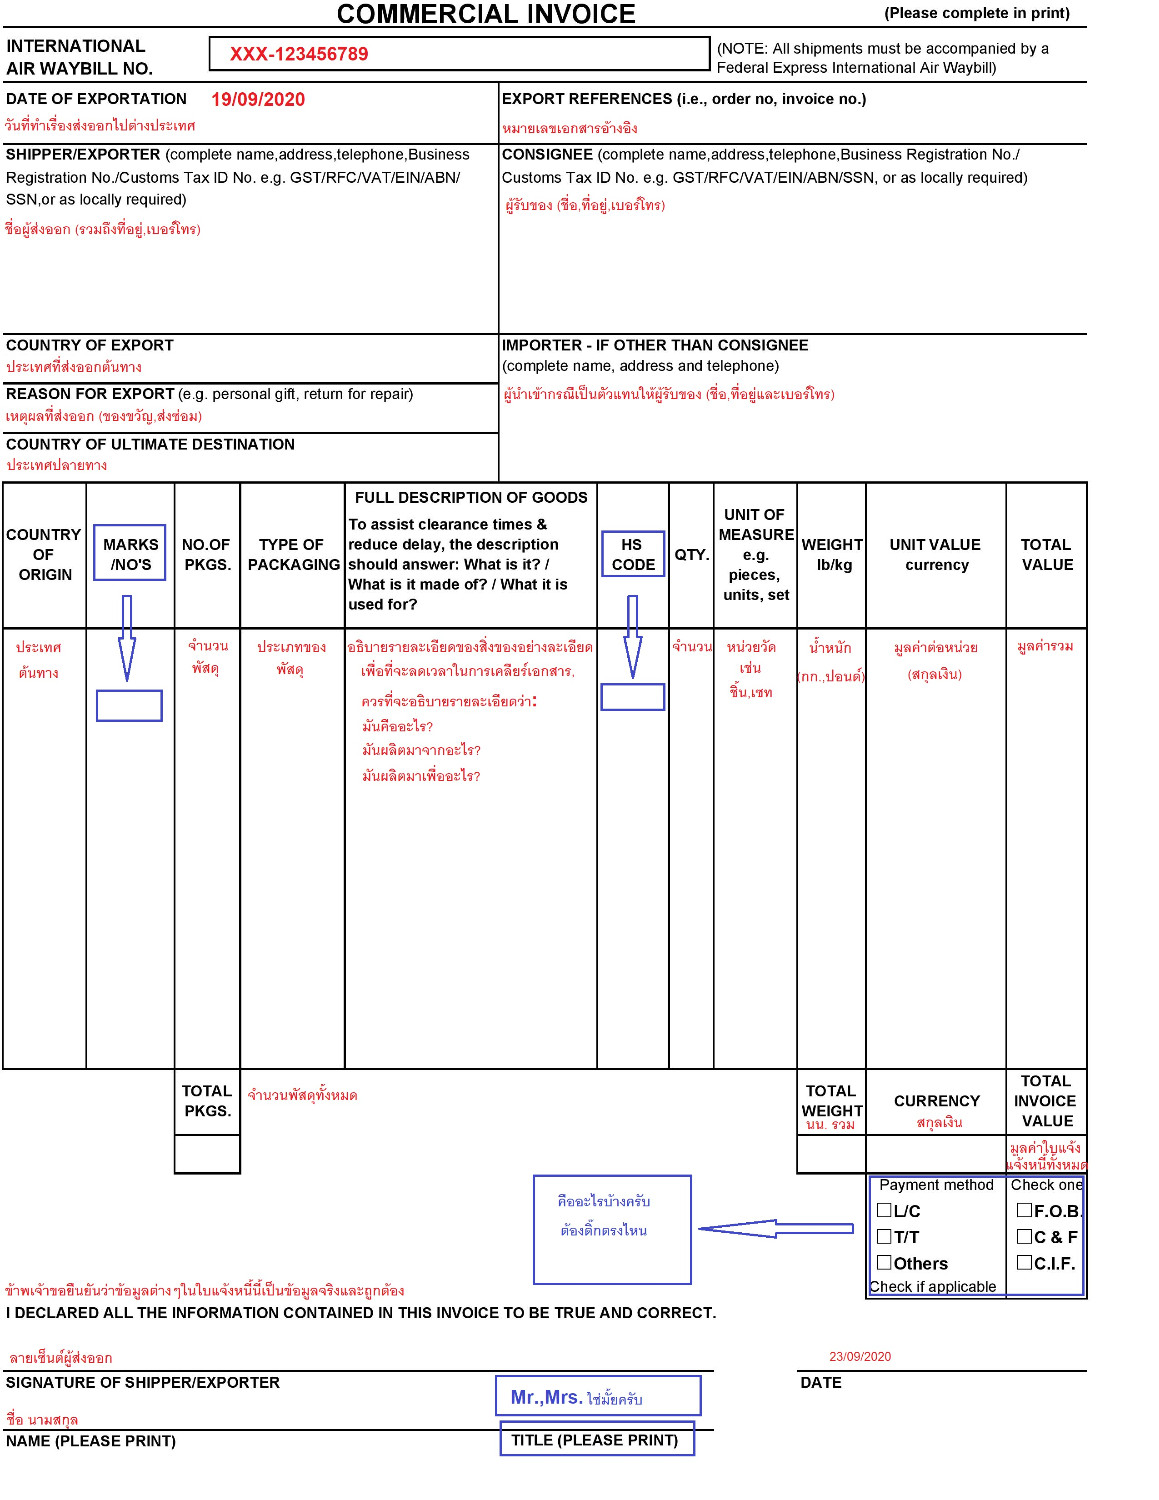 picture of fedex express express invoice